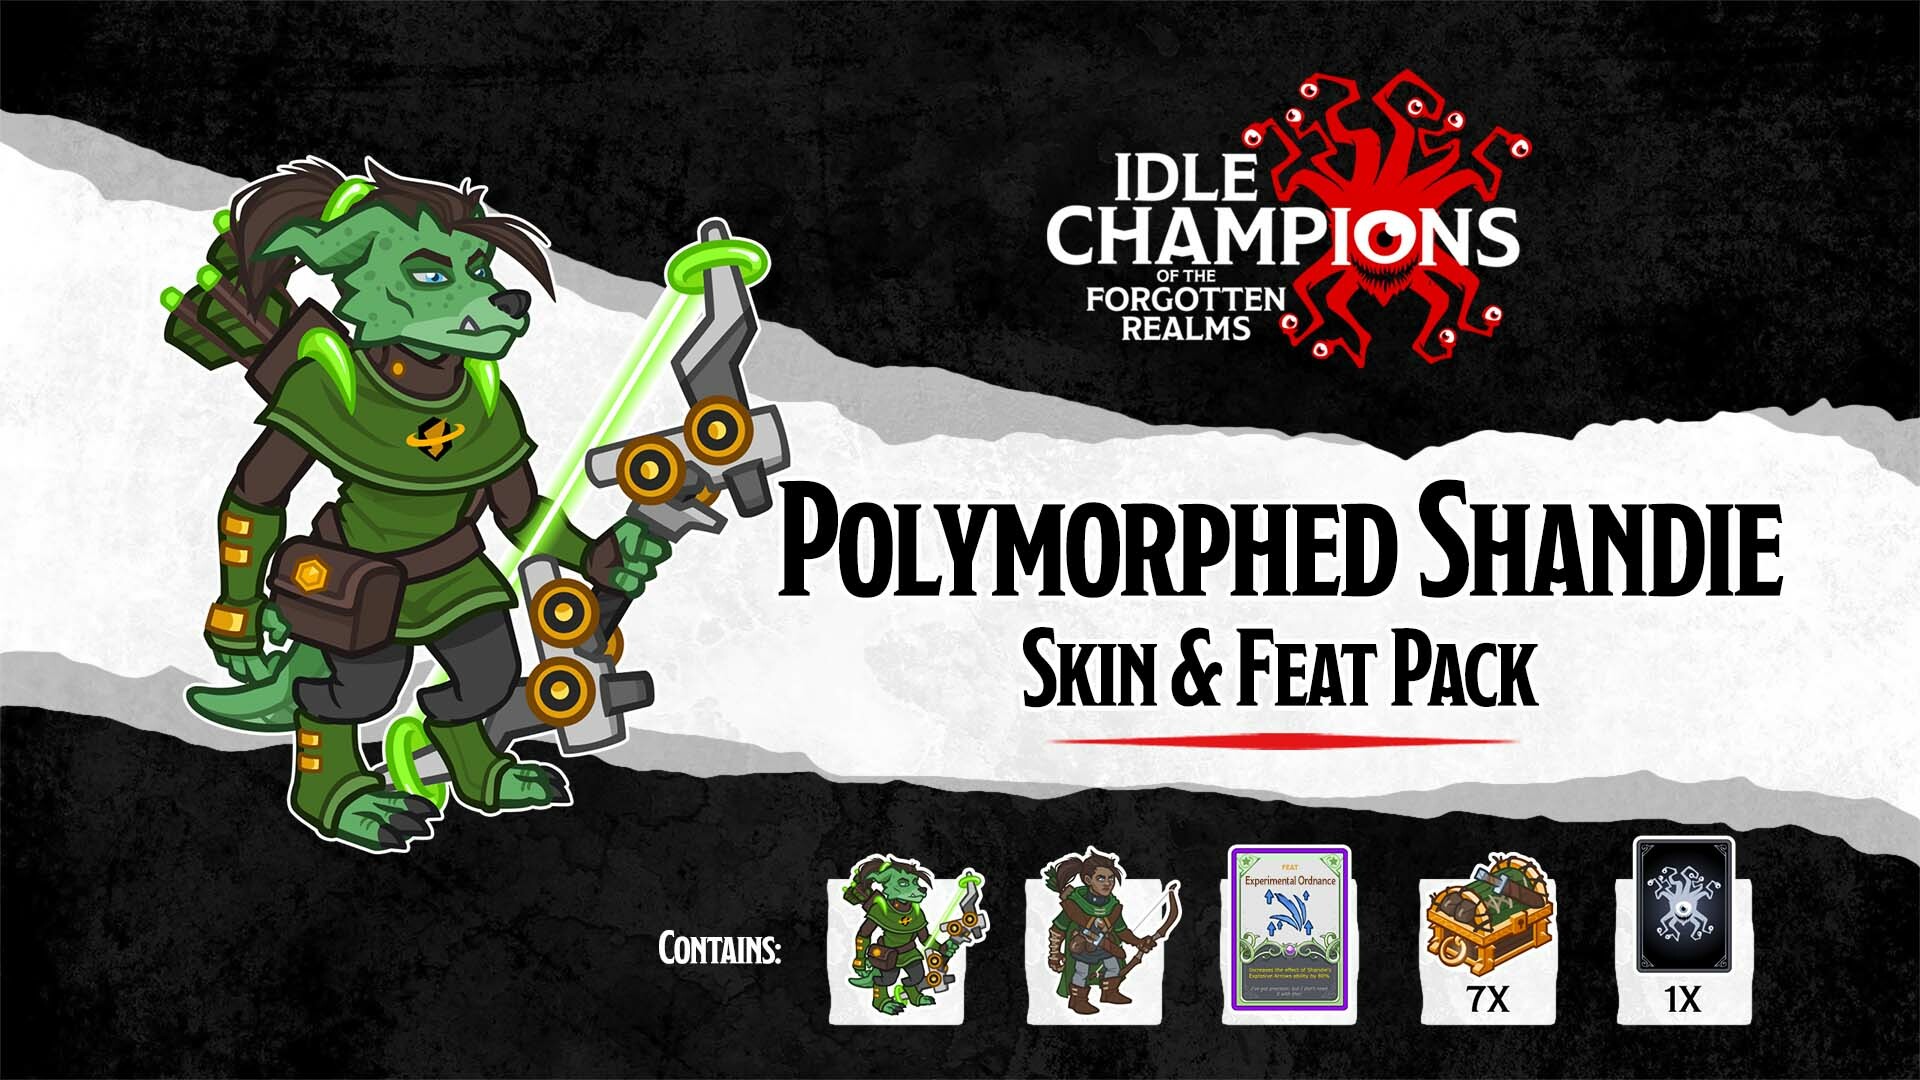 Idle Champions - Polymorphed Shandie Skin & Feat Pack DLC Steam CD Key 1.02$